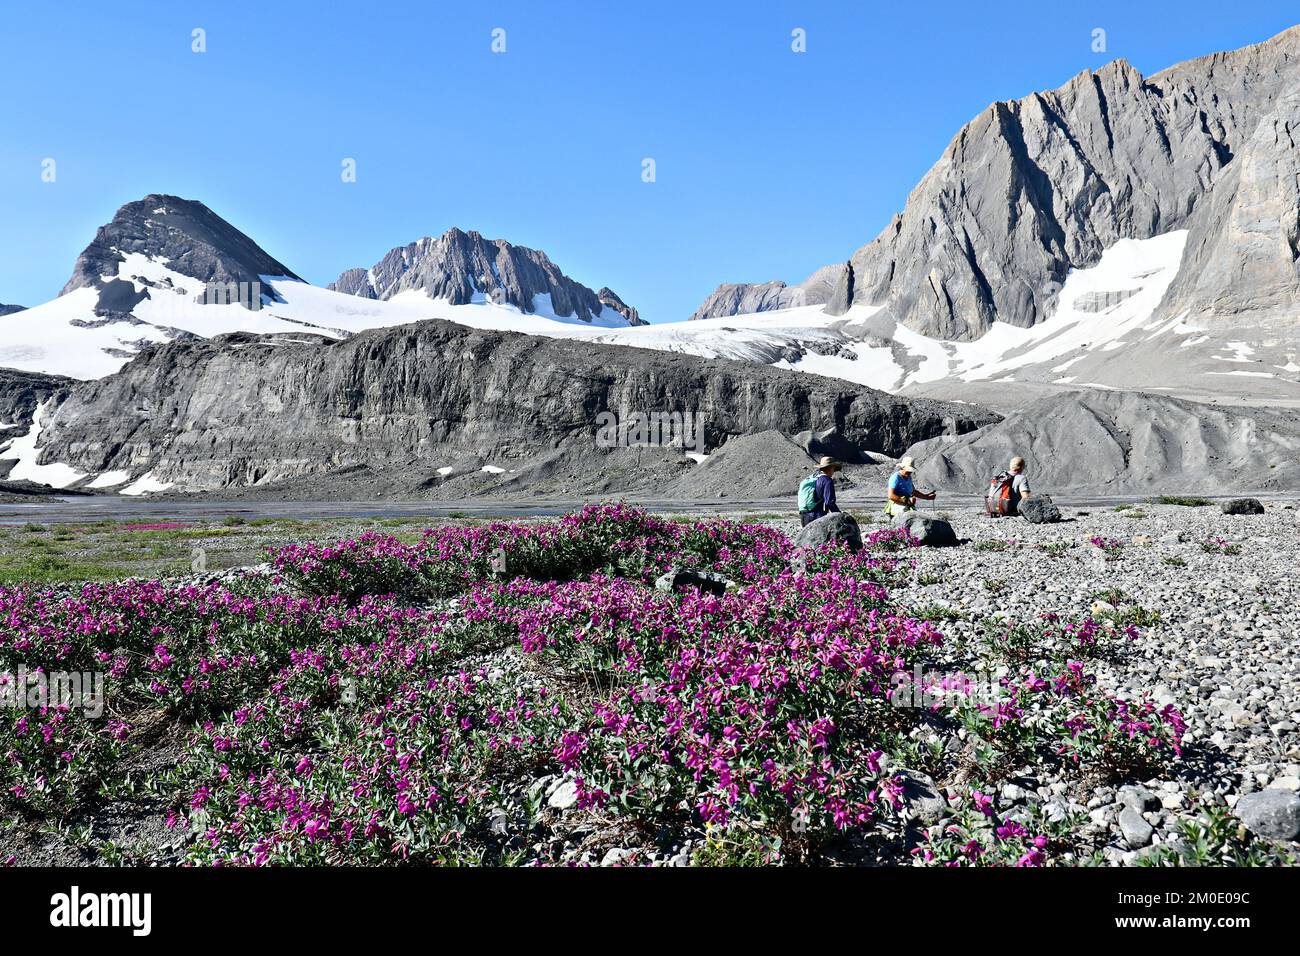 Hiking through the glaciers, rocks, and wildflowers on Petain Glacier. Stock Photo